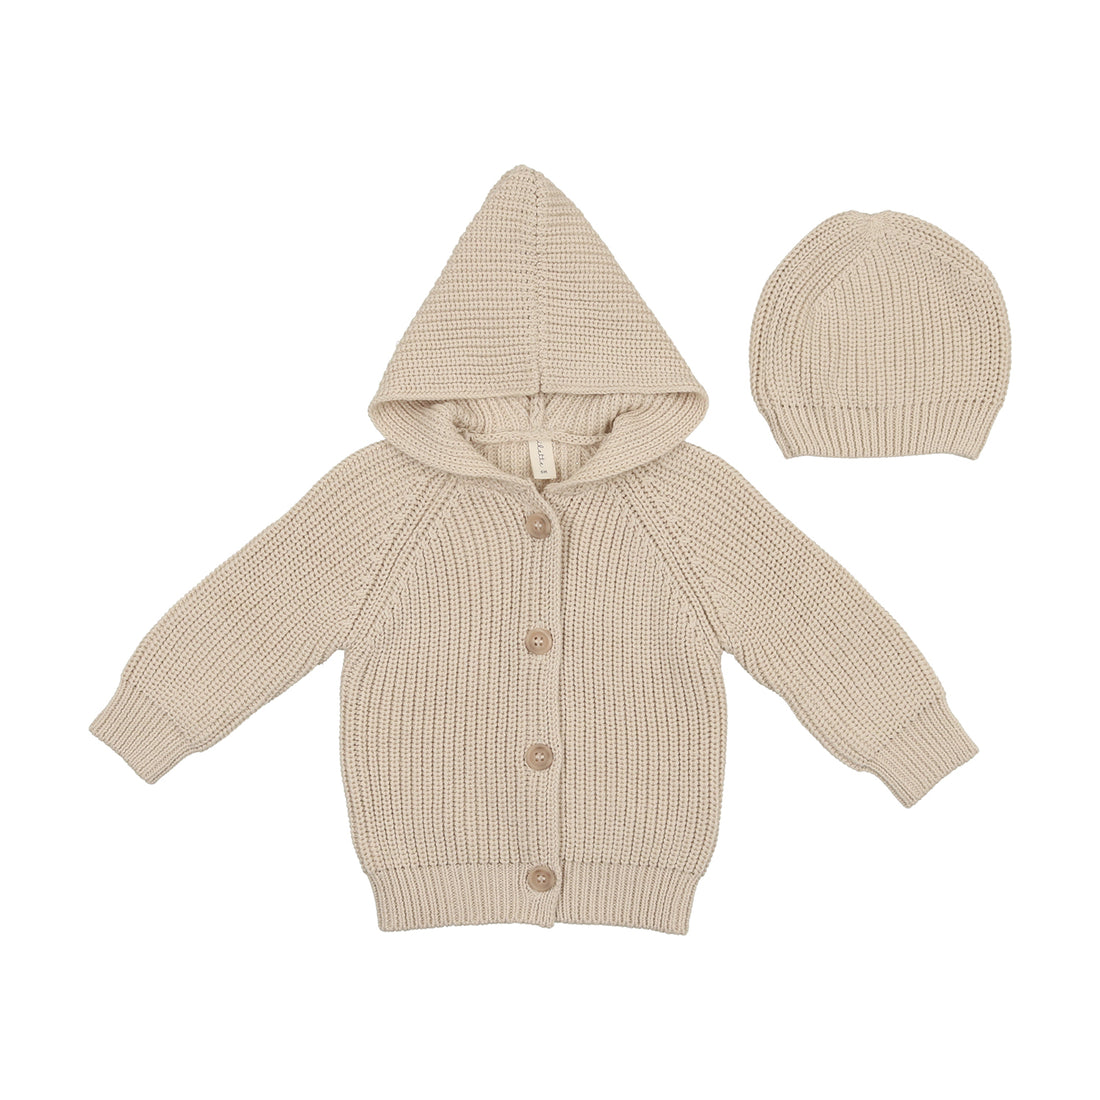 Knit Jacket And Beanie - Natural